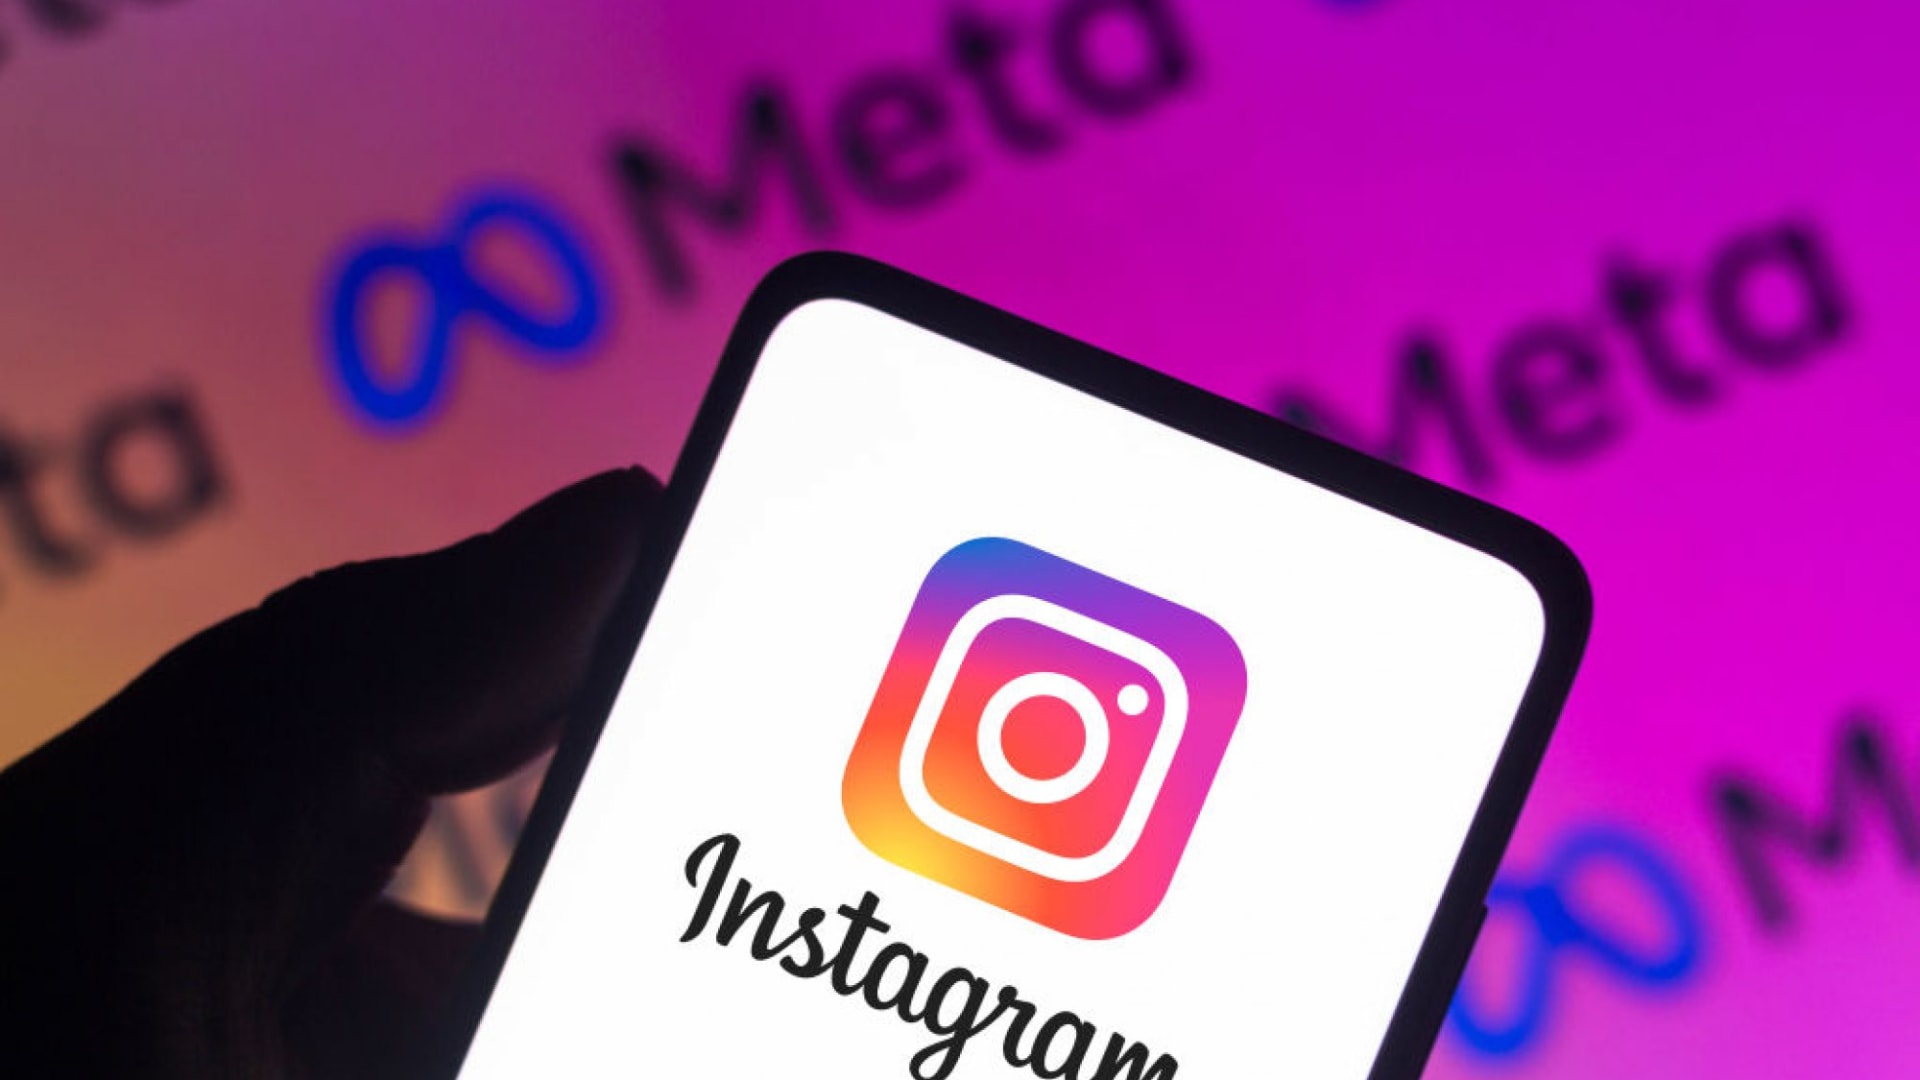 IHere are 10 AWESOME INSTAGRAM HACKS YOU WERE Totally Ignorant!